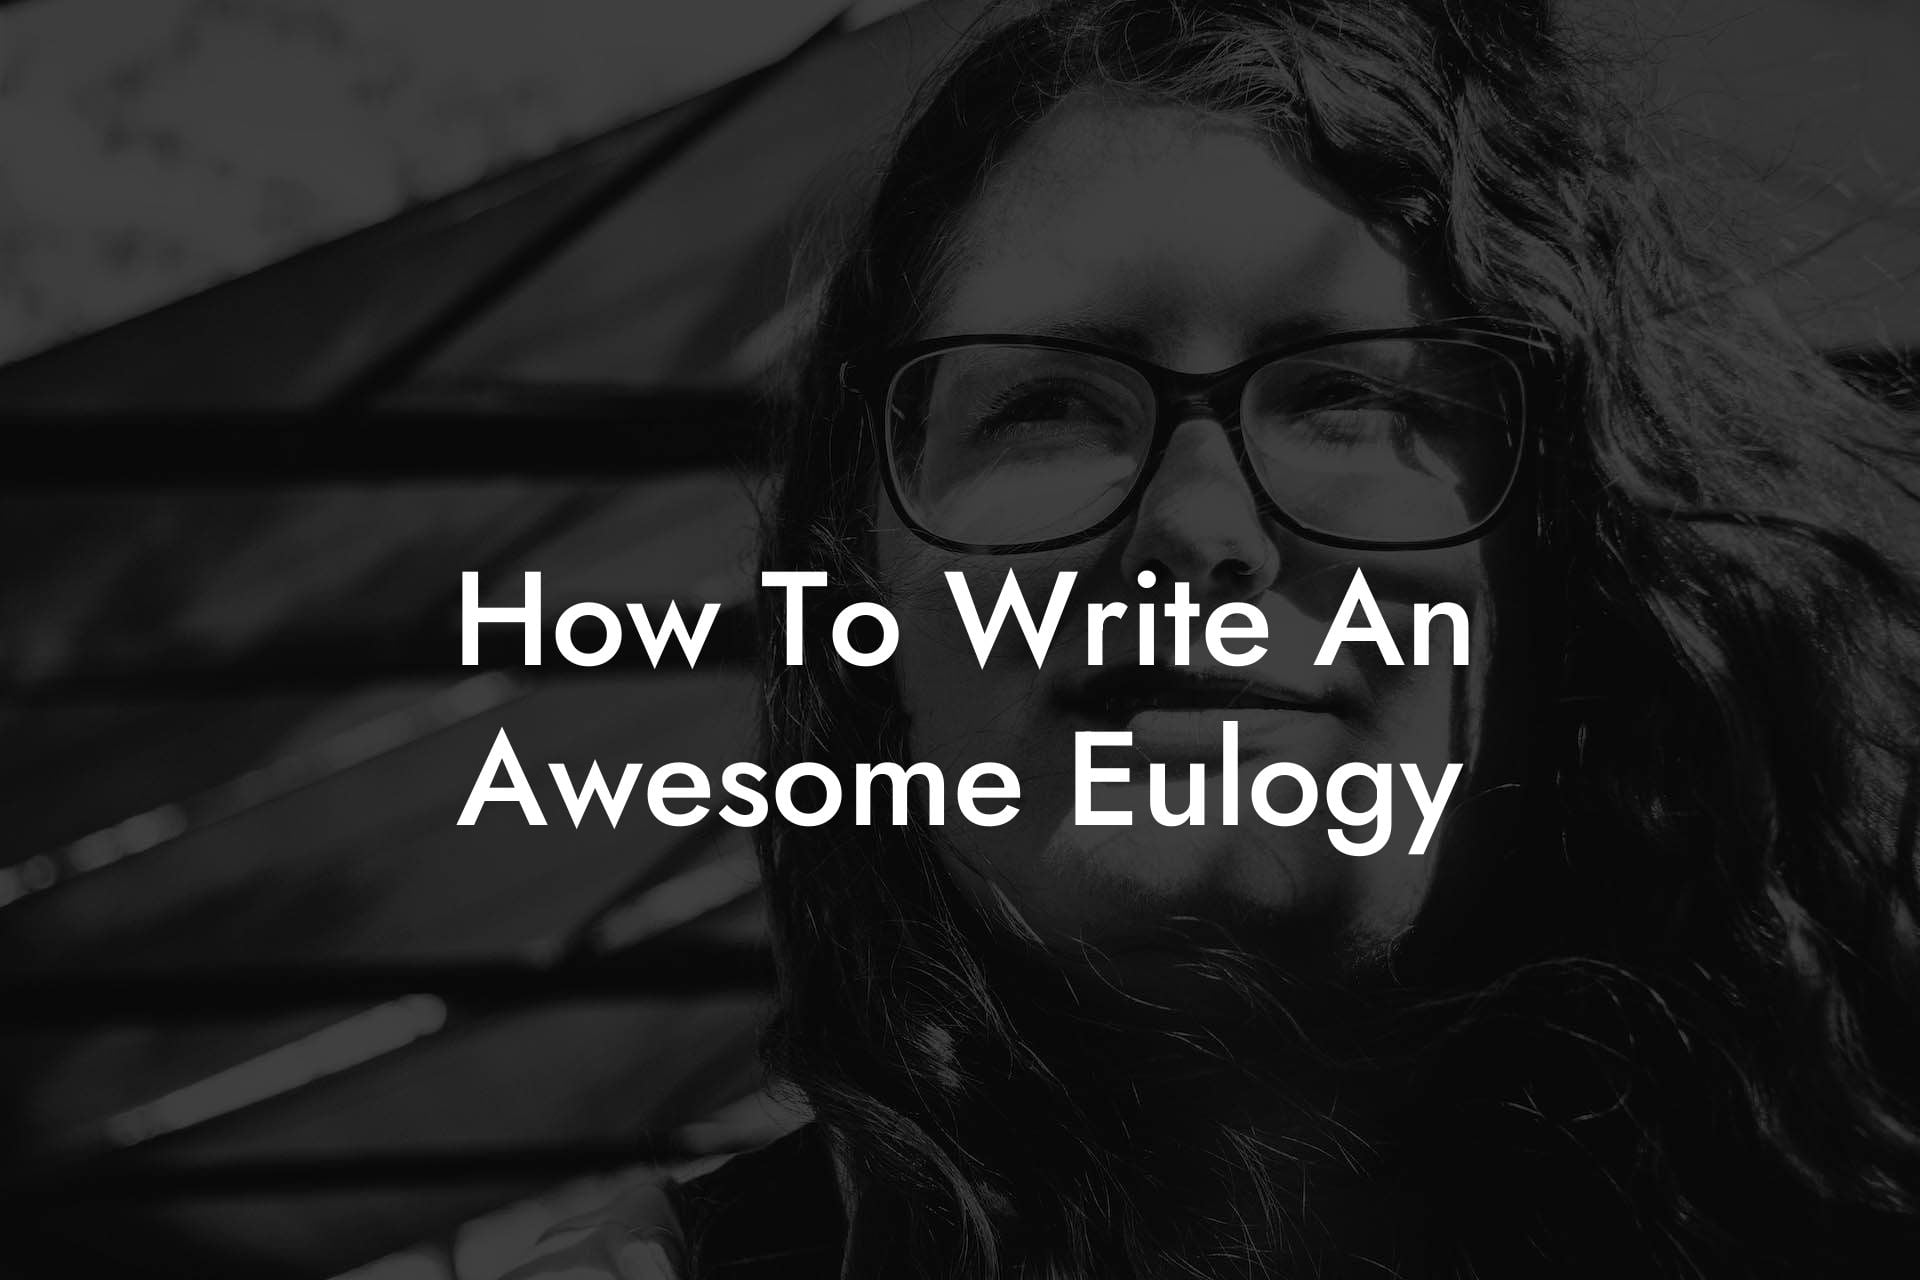 How To Write An Awesome Eulogy